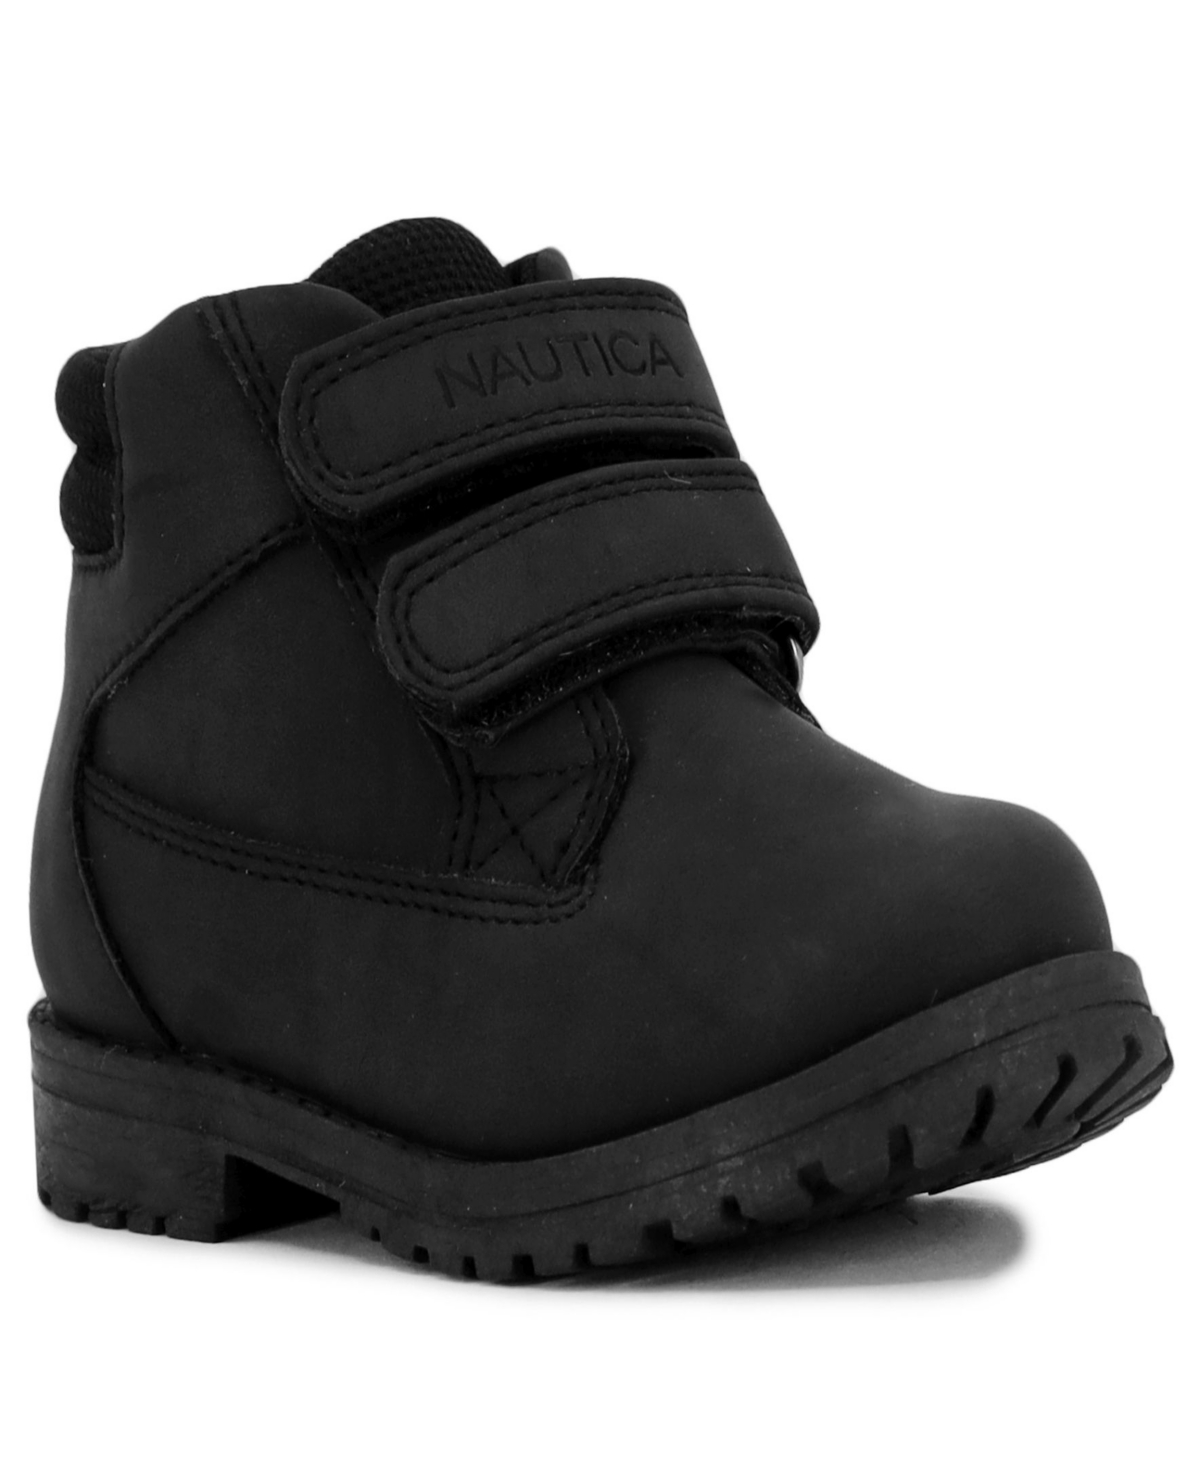 Nautica Kids' Toddler Boys Boylston 2 Cold Weather Boots In Black